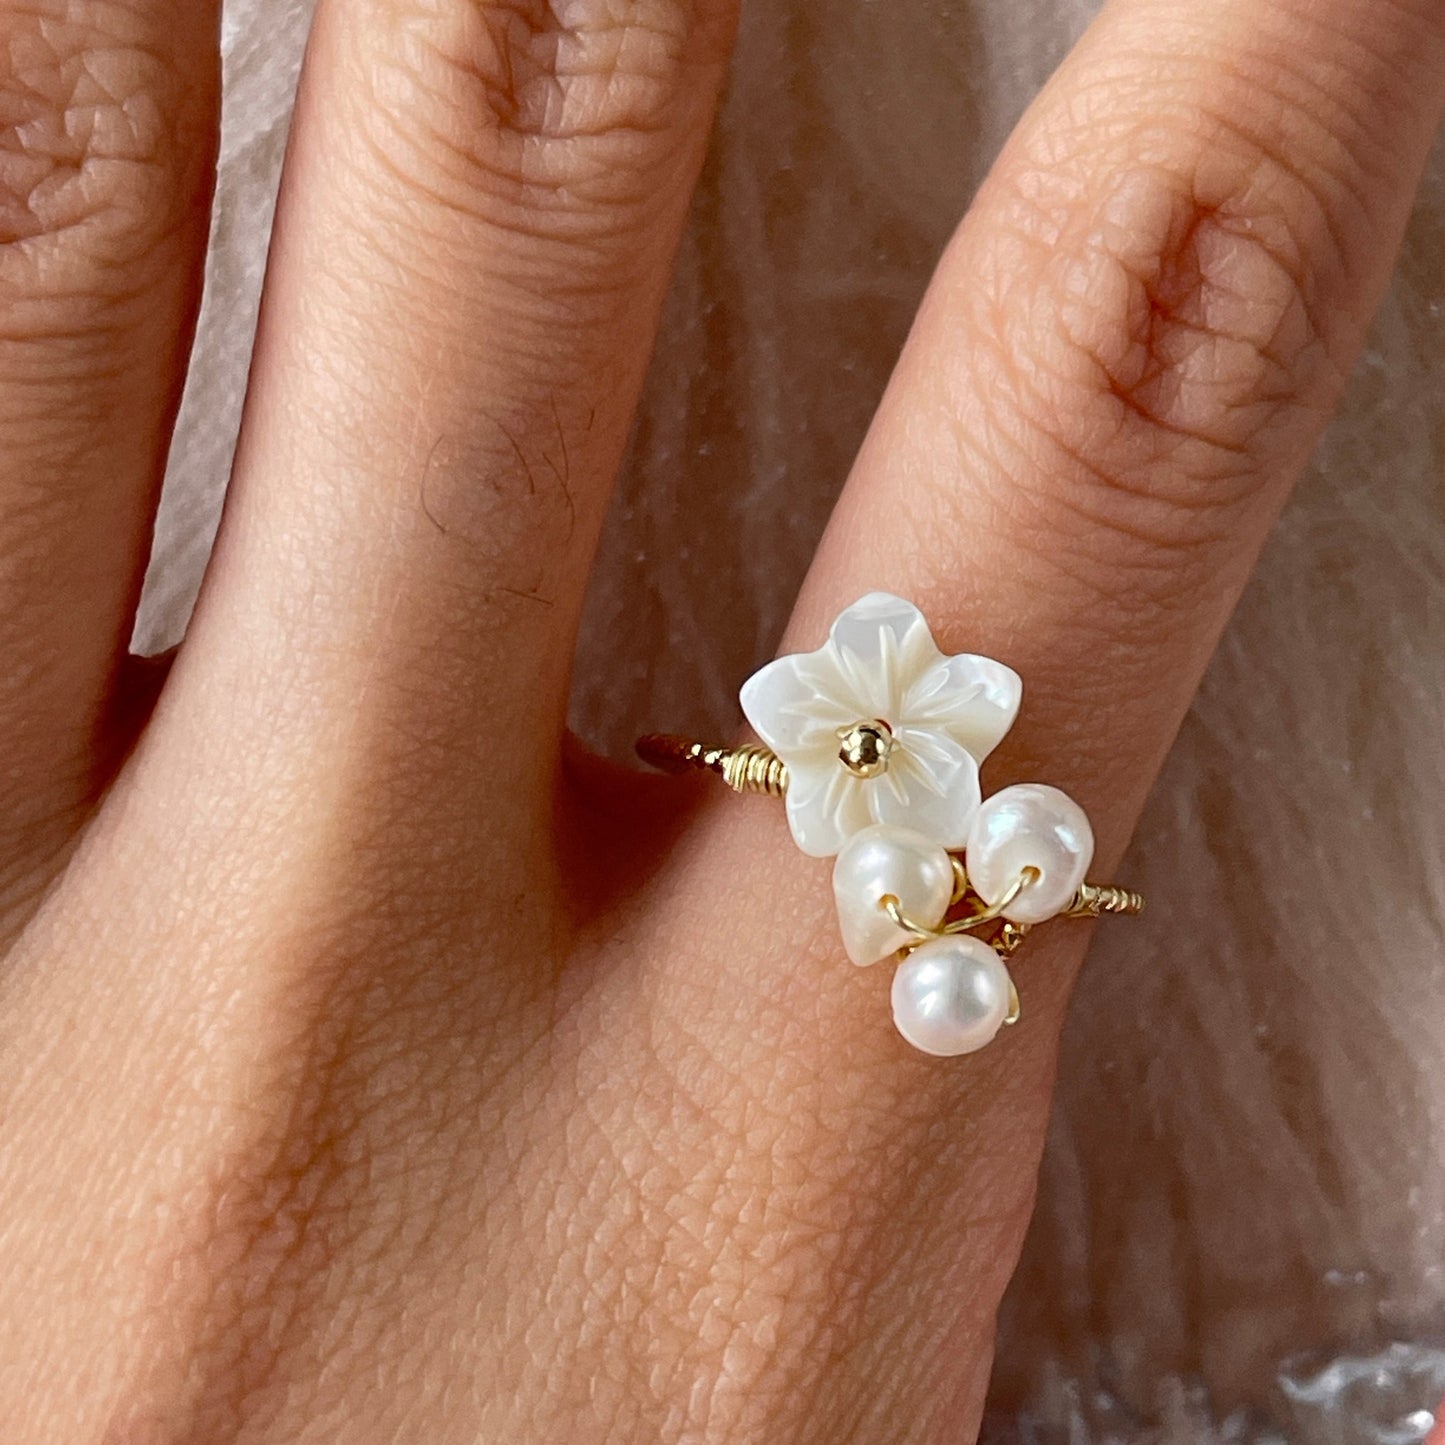 Natural pearl ring, White flower ring, Floral pearl ring, Gold cocktail ring, Pearl stacking ring, Handmade pearl ring, Minimalist open ring